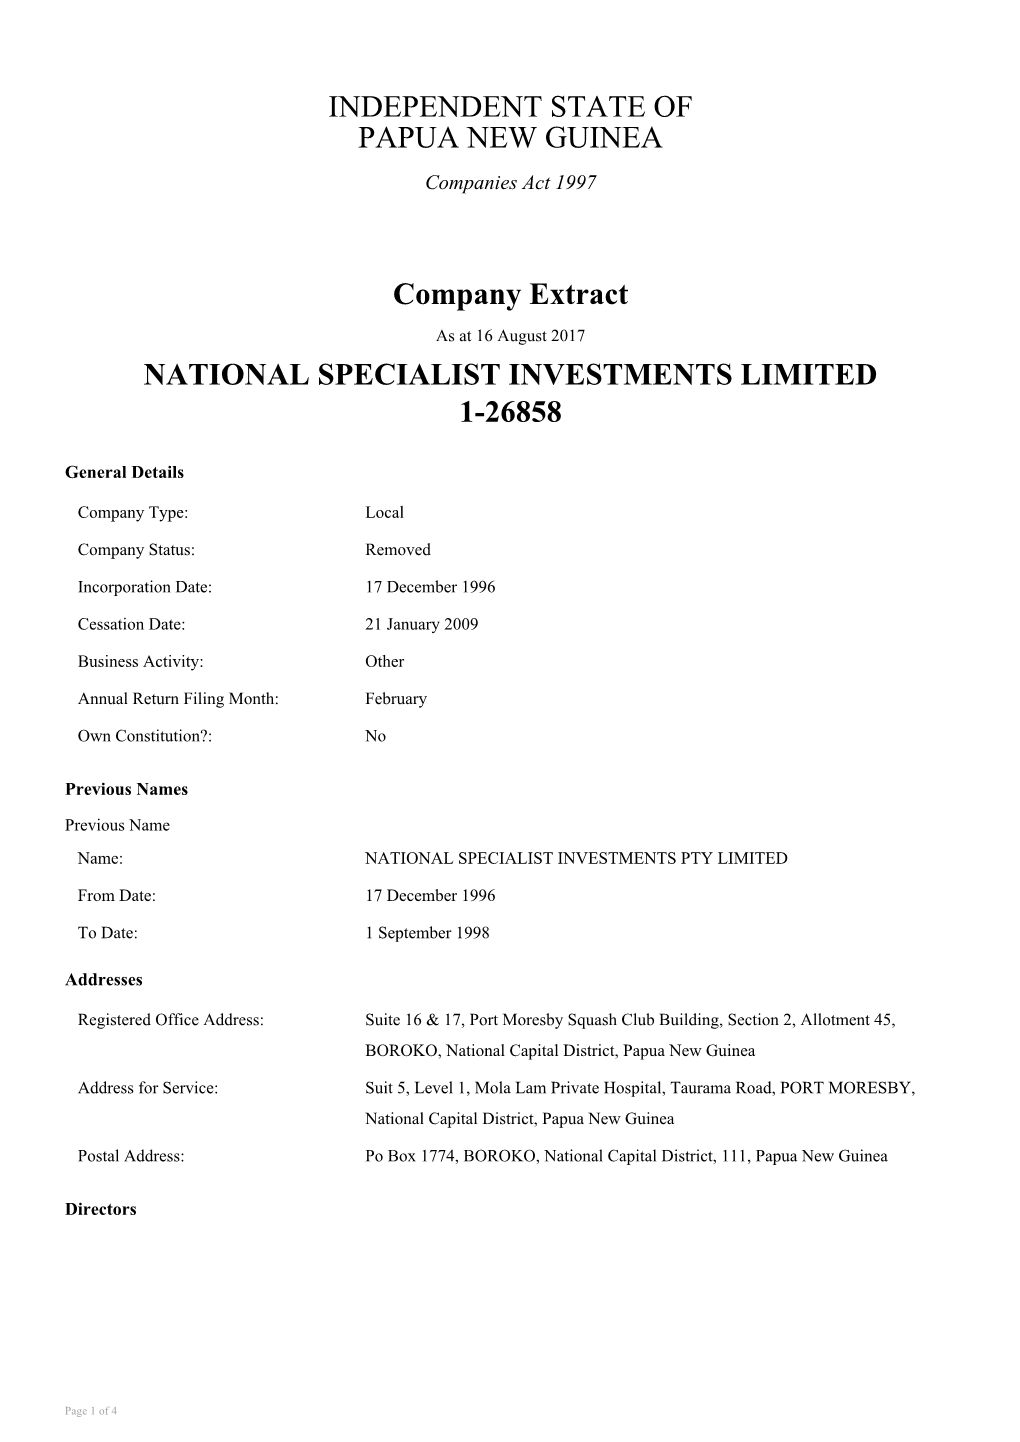 INDEPENDENT STATE of PAPUA NEW GUINEA Companies Act 1997